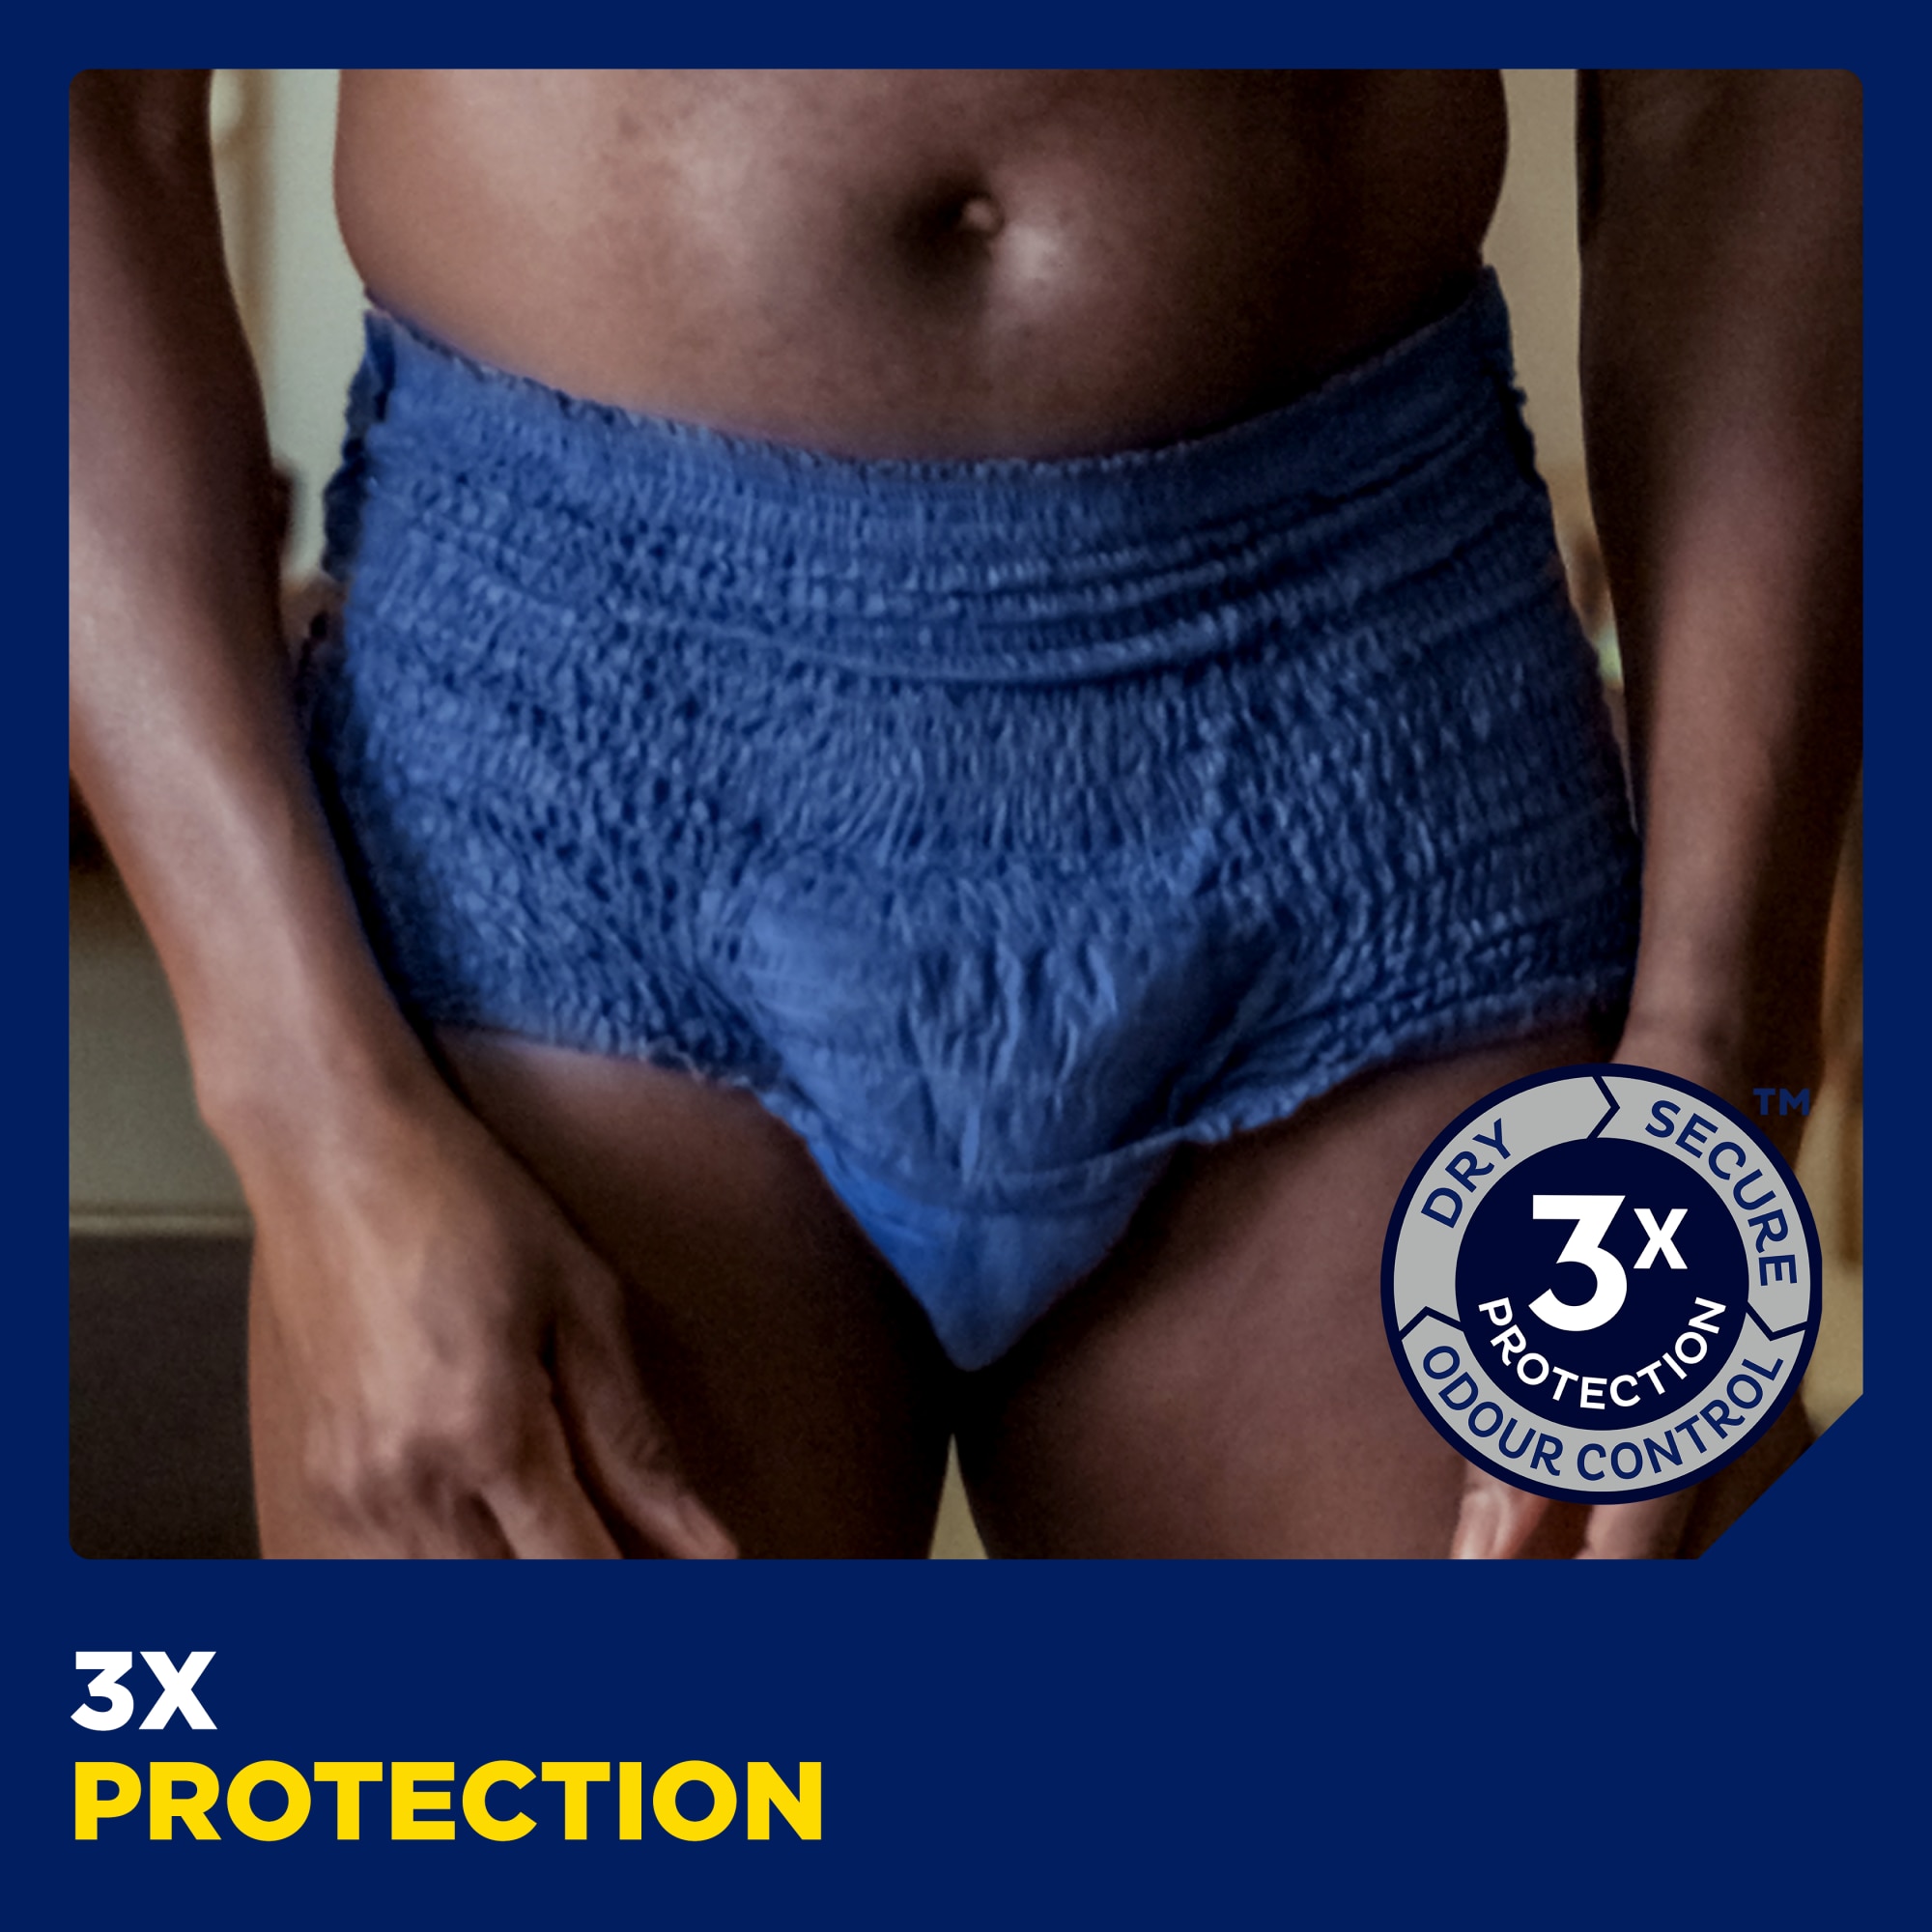 TENA Pants Normal | Incontinence pants for total security